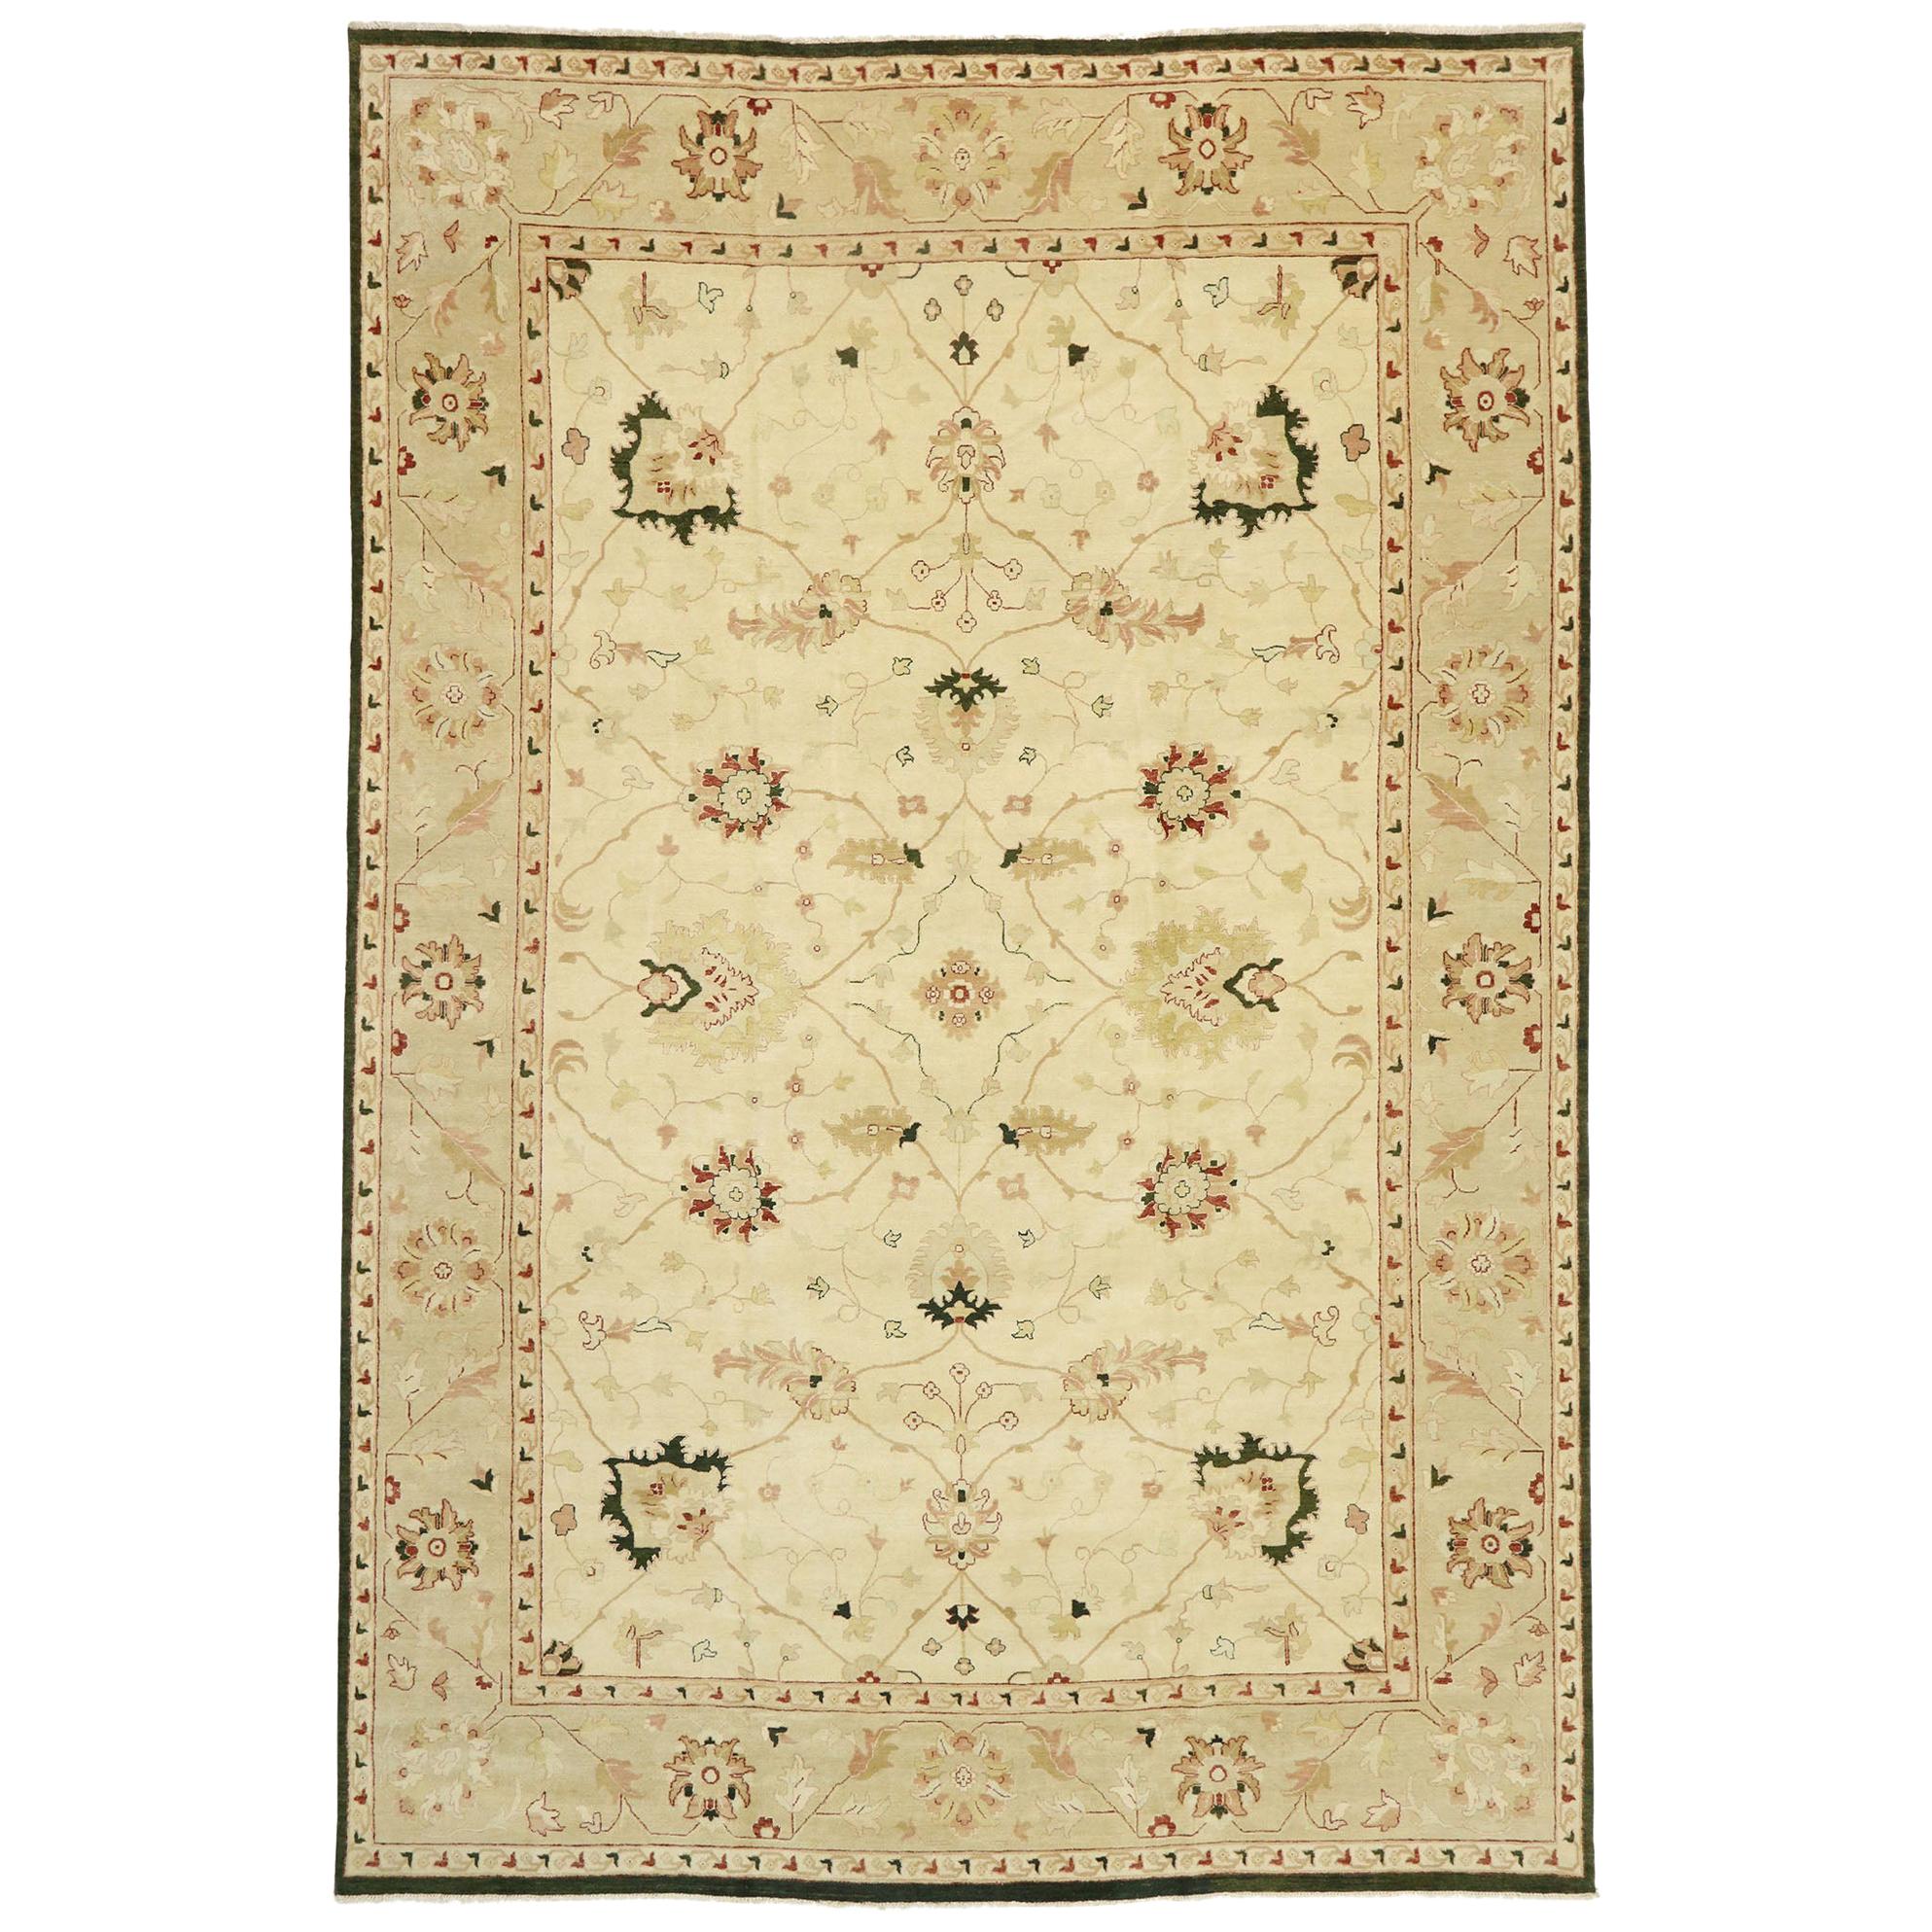 New Contemporary Persian Mahal Indian Rug with Modern Arts & Crafts Style